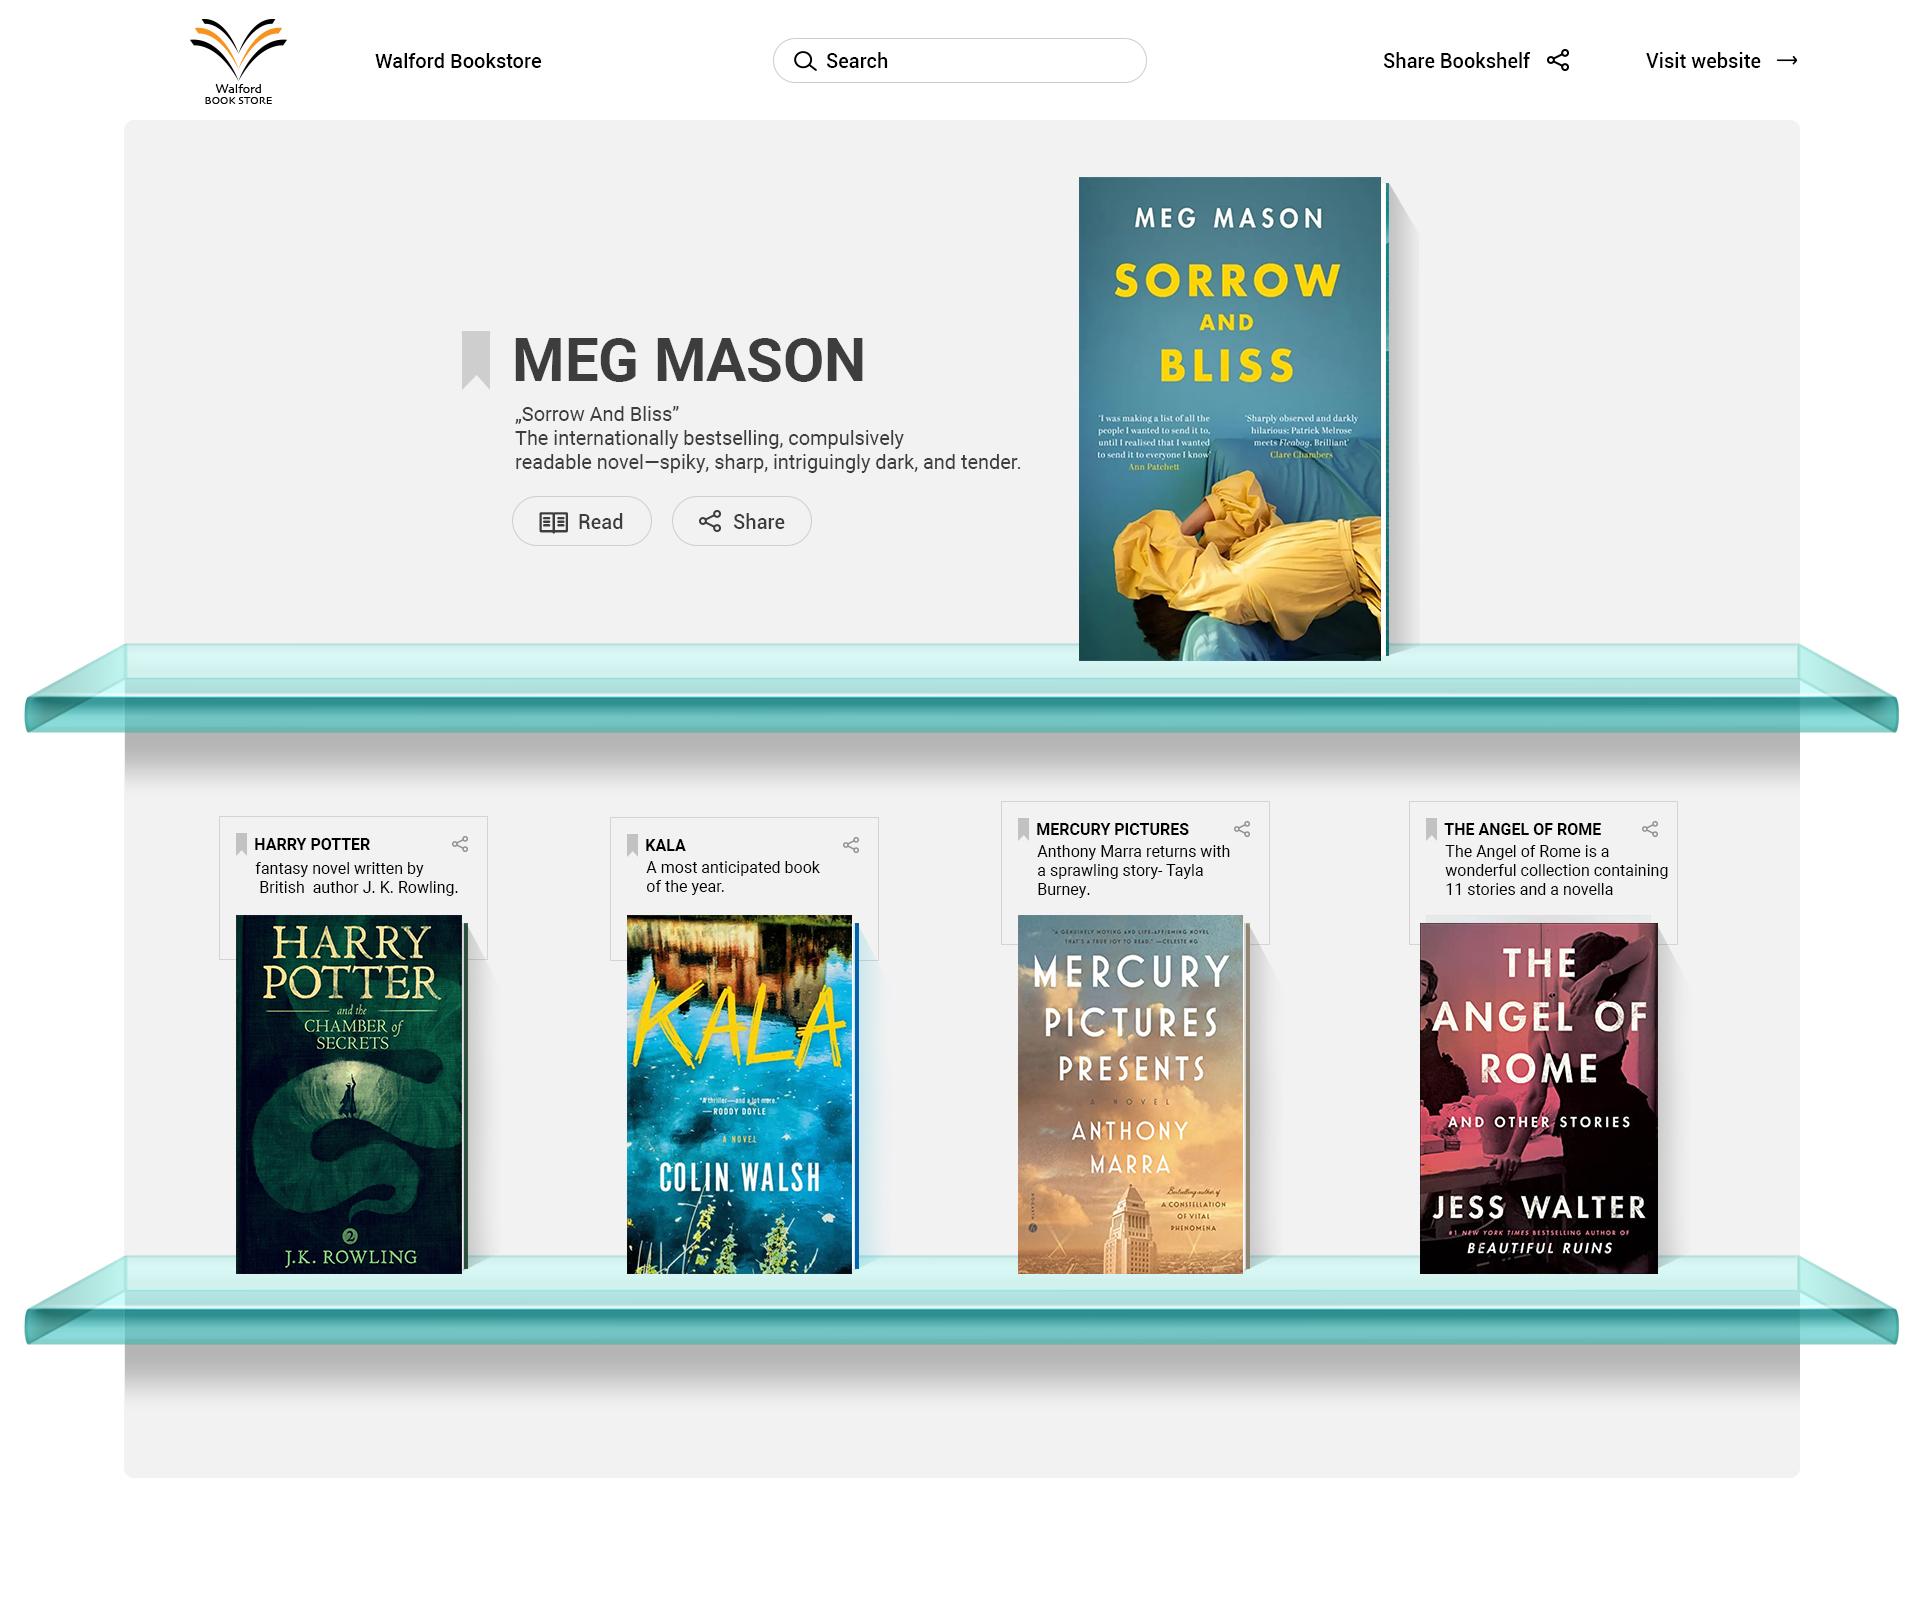 Publish your flipbooks collection in one place- your own online bookshelf. Customize and embed it on your website in seconds. Simple as that!